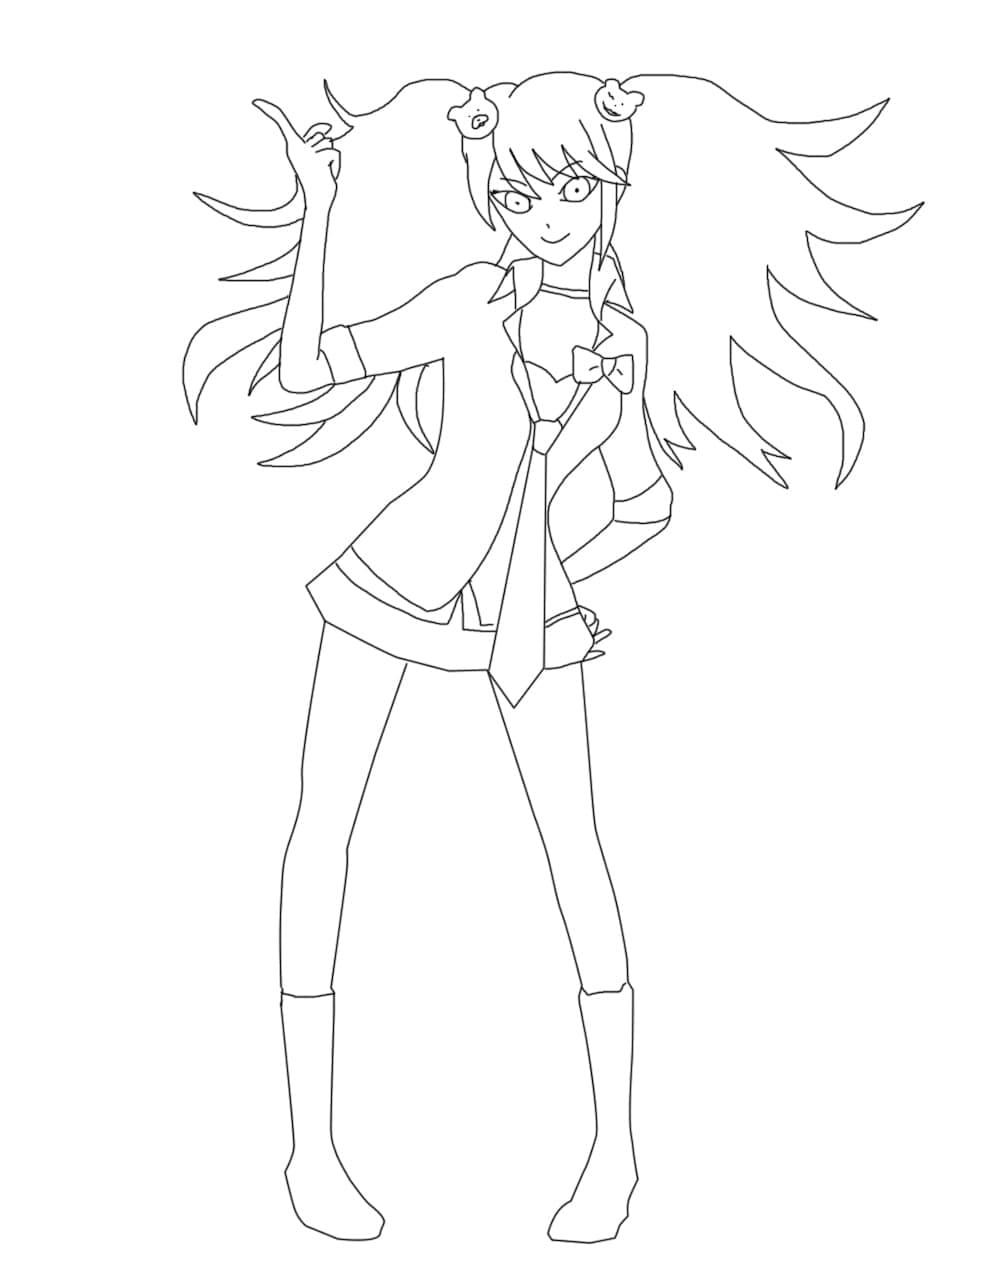 Junko Enoshima from Danganronpa Coloring Page   Anime Coloring Pages